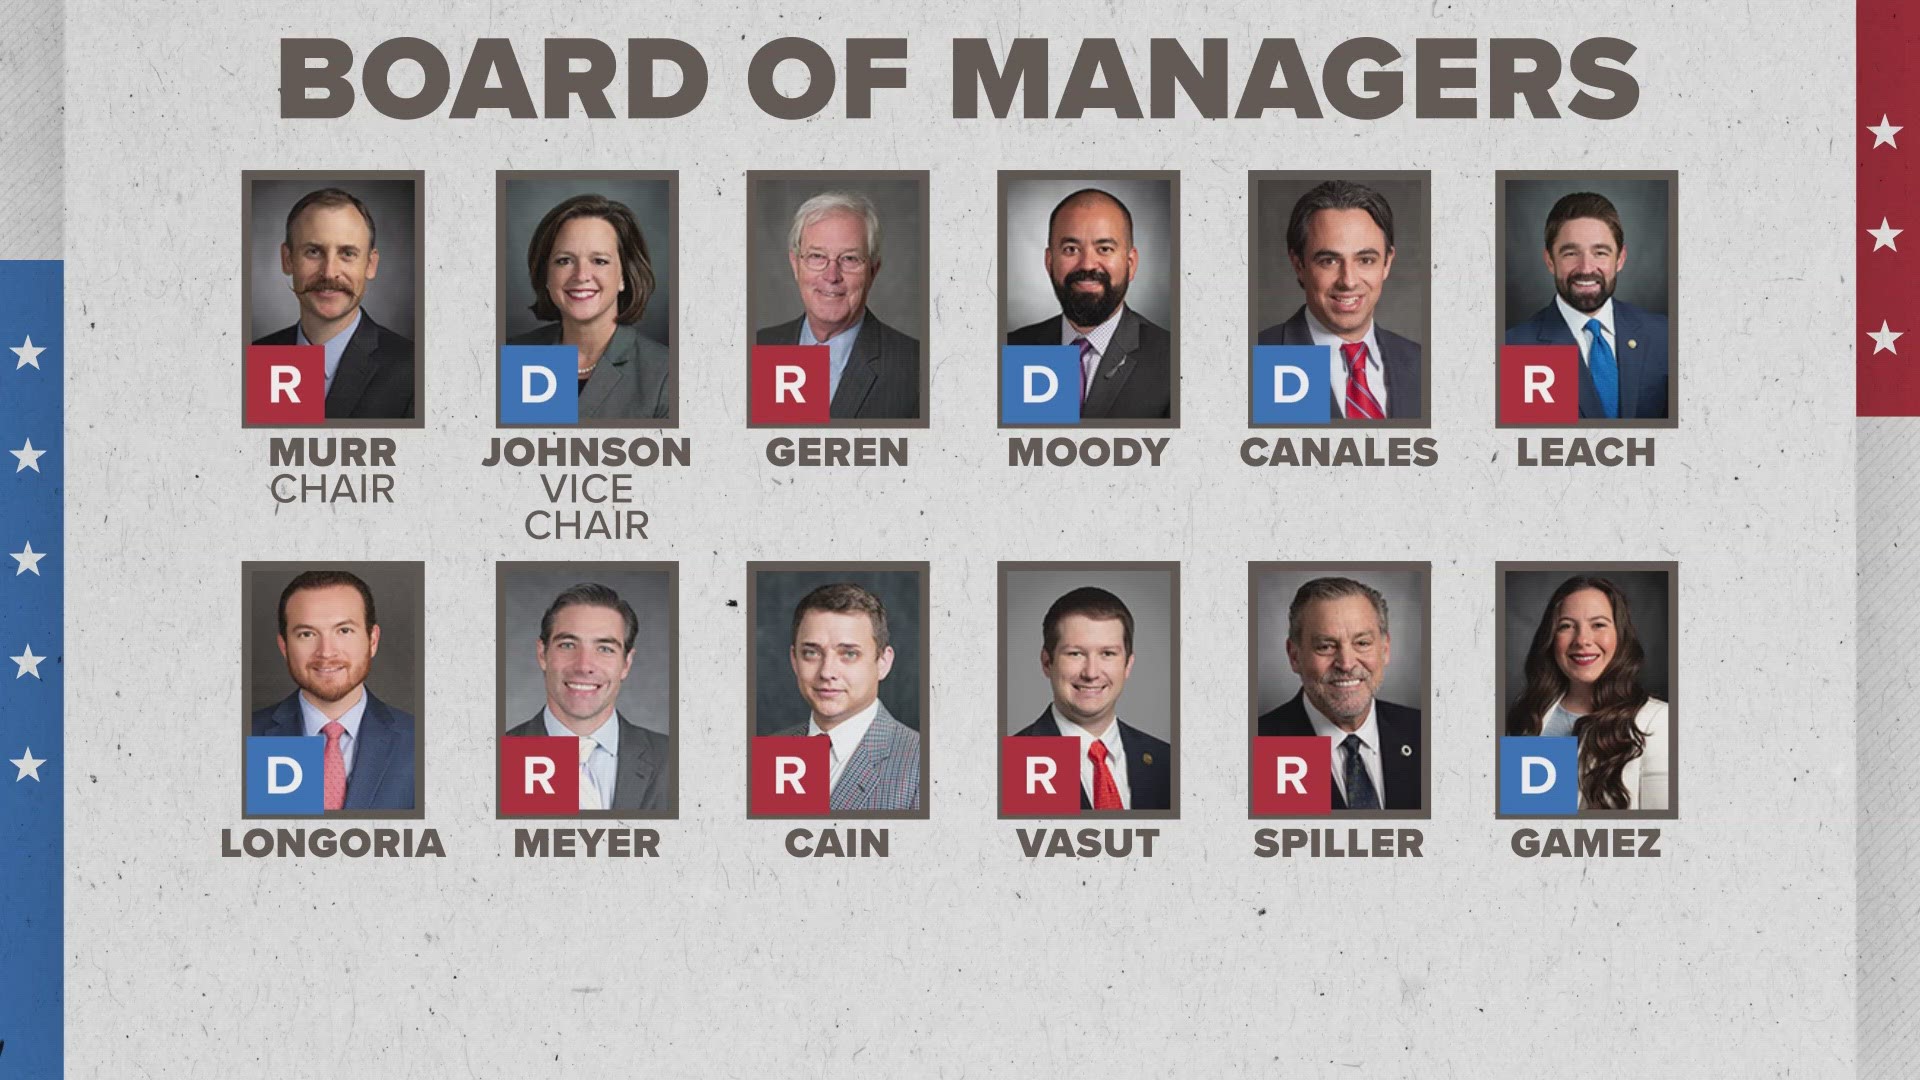 Seven Republicans and five Democrats make up the board of managers who will handle the prosecution in the trial.